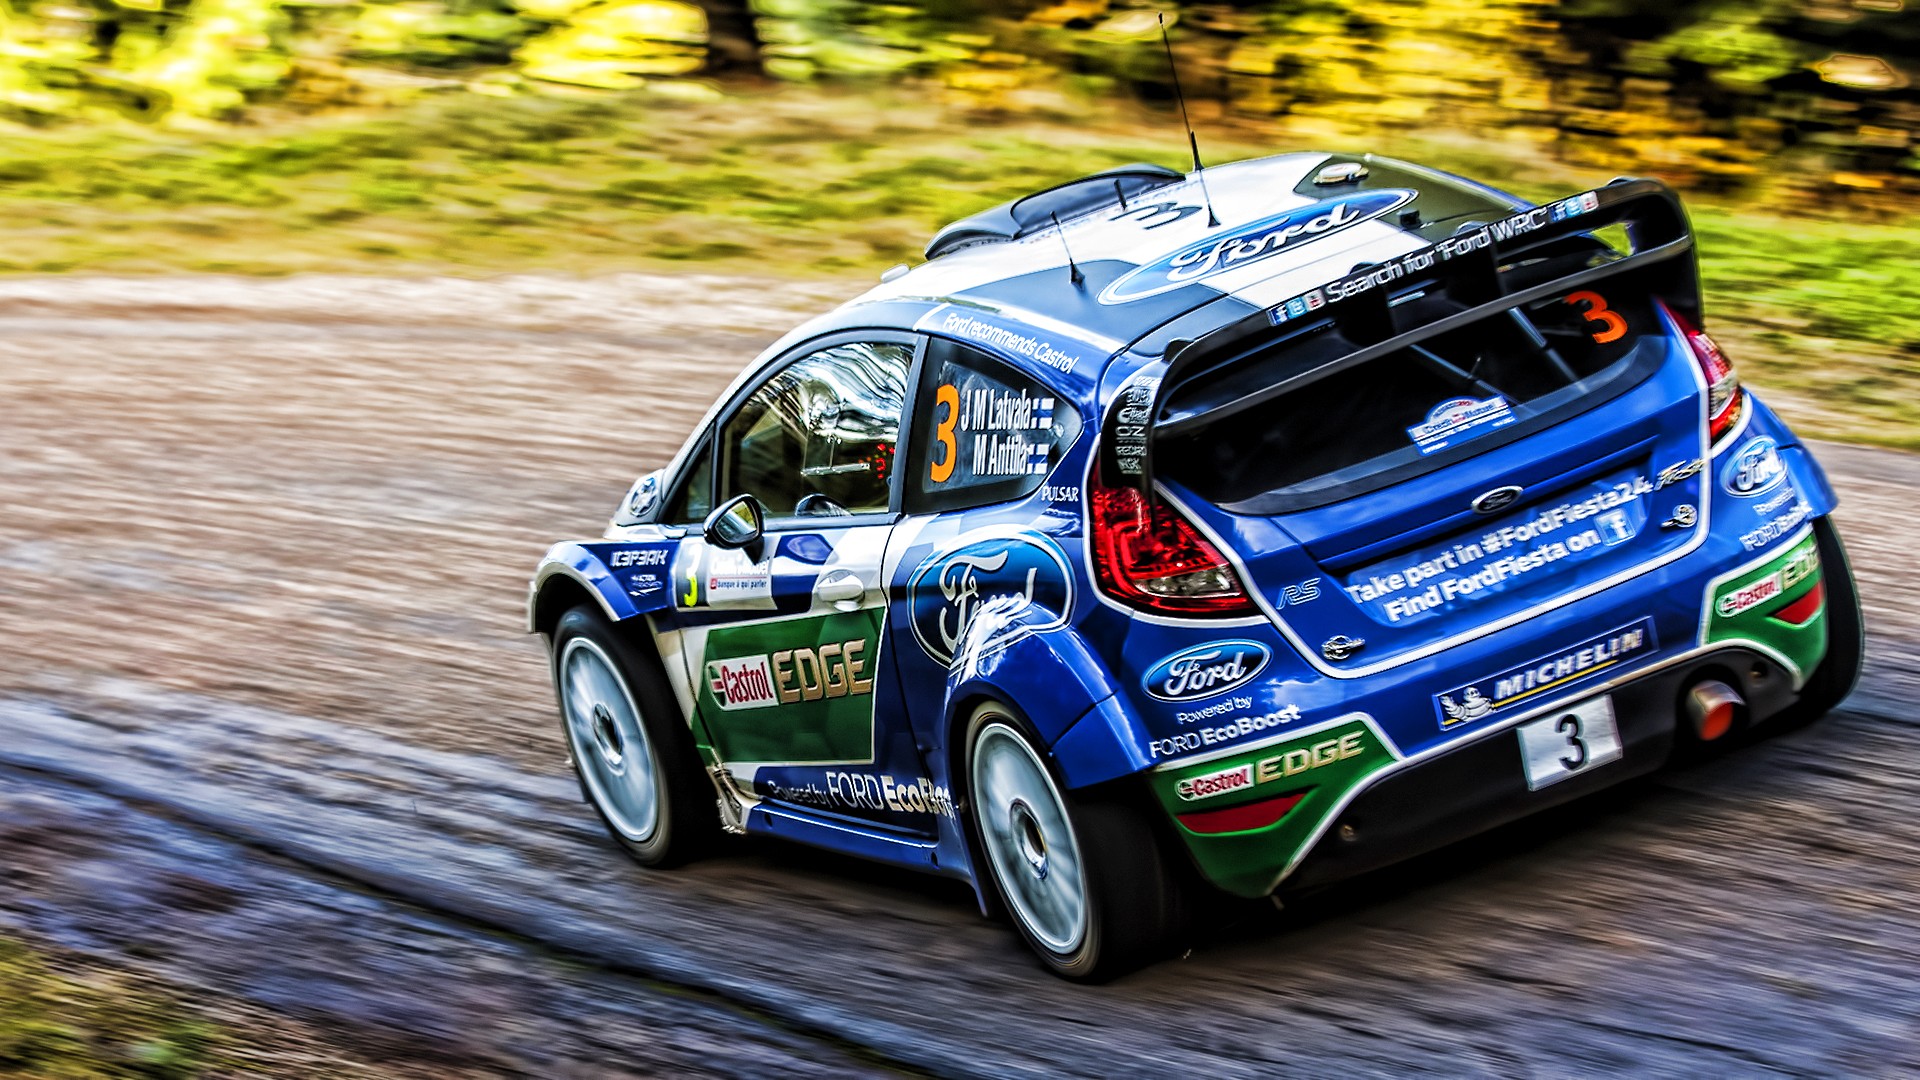 Ford Fiesta Rs Wrc Race Cars Wallpapers Hd Desktop And Mobile Backgrounds